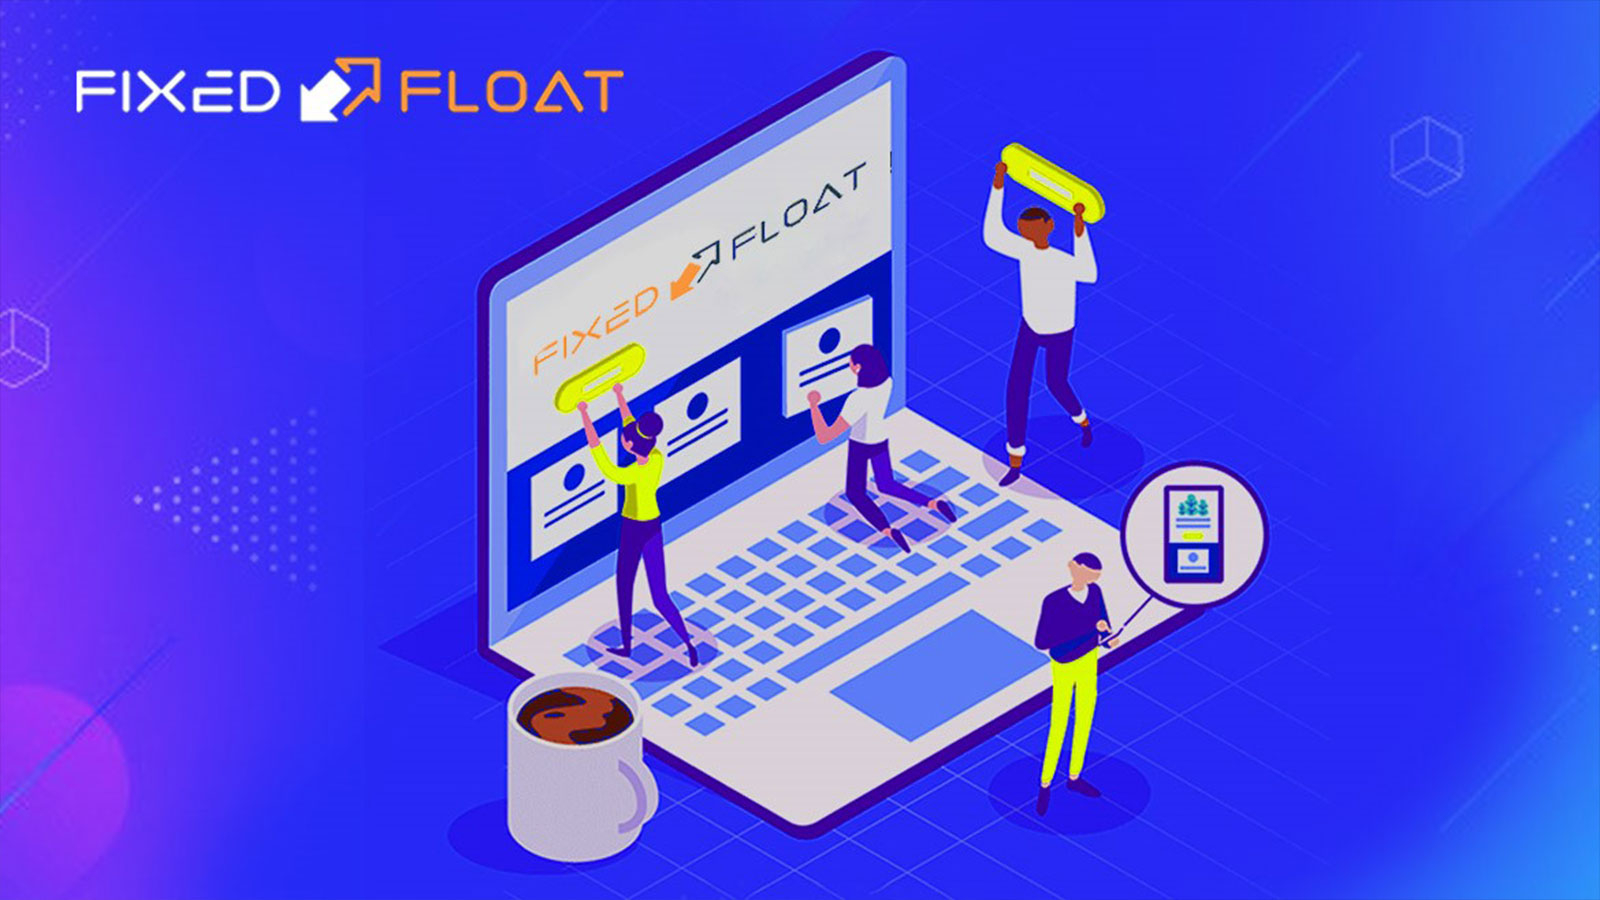 FixedFloat Unveils Revamped Website With Enhanced User Experience